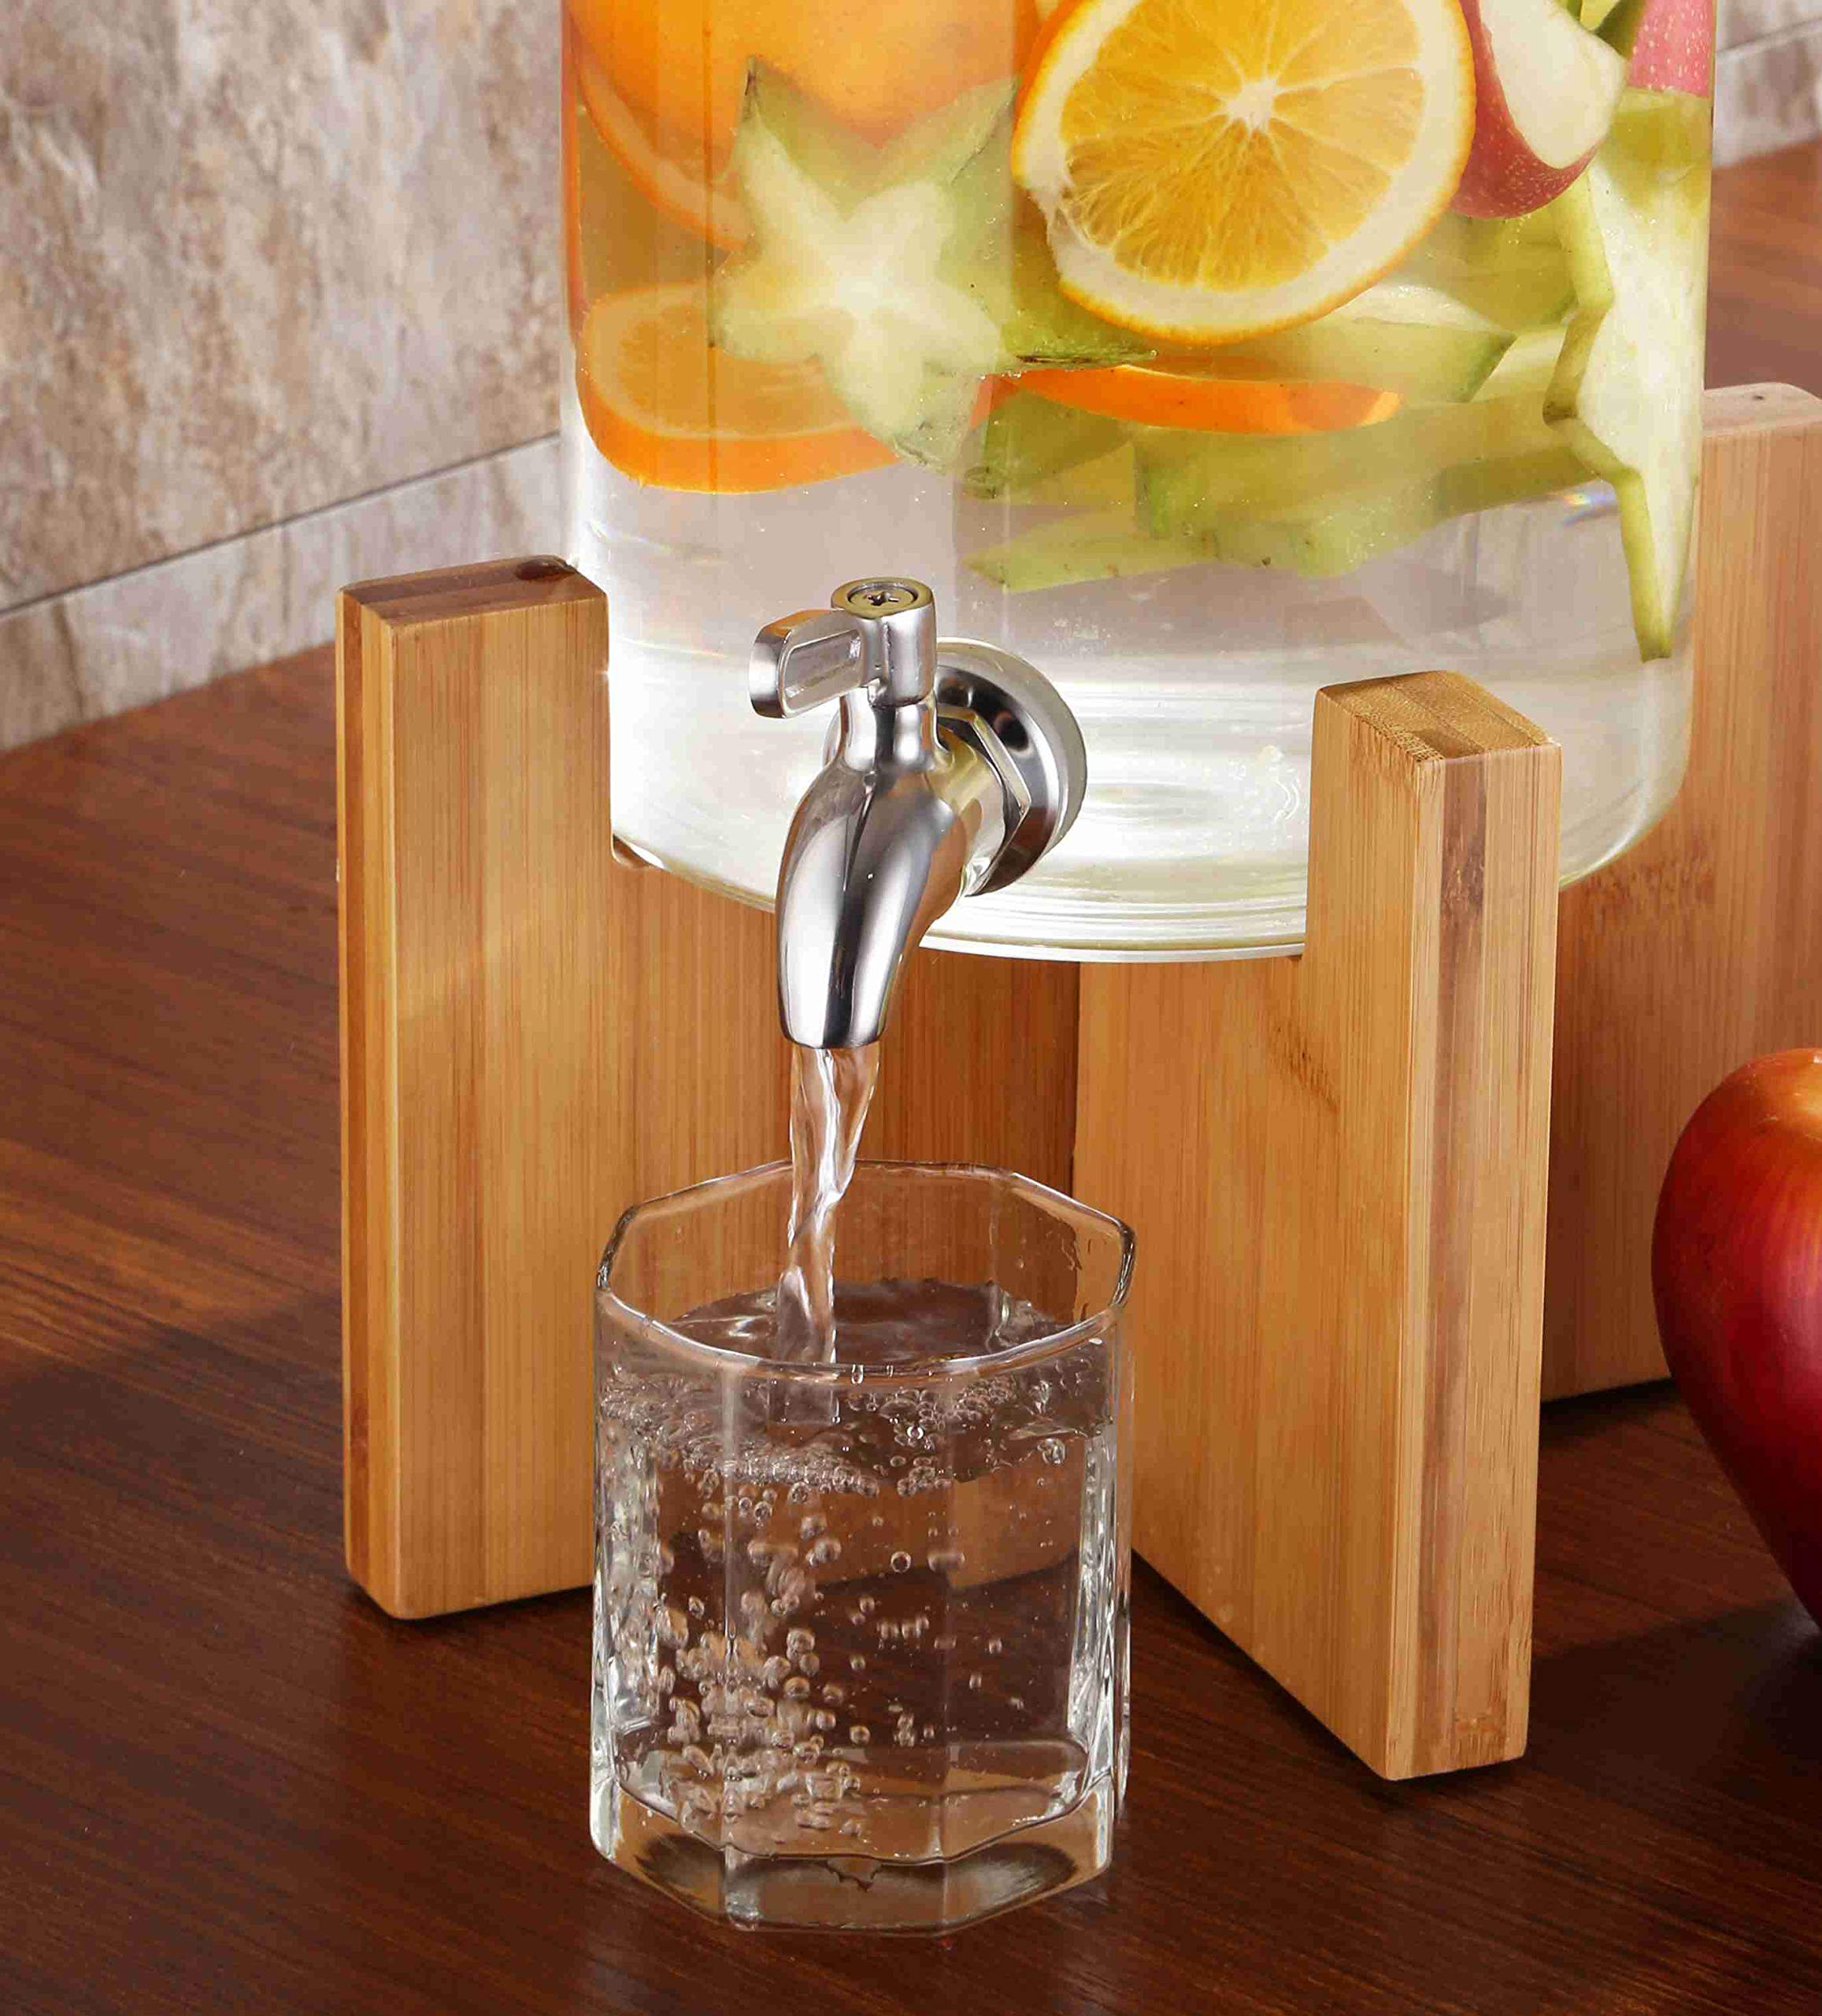 Stainless Works SSS010 Stainless Steel Beverage Dispenser Spigot (Fits 5/8 inch opening) - $18.95